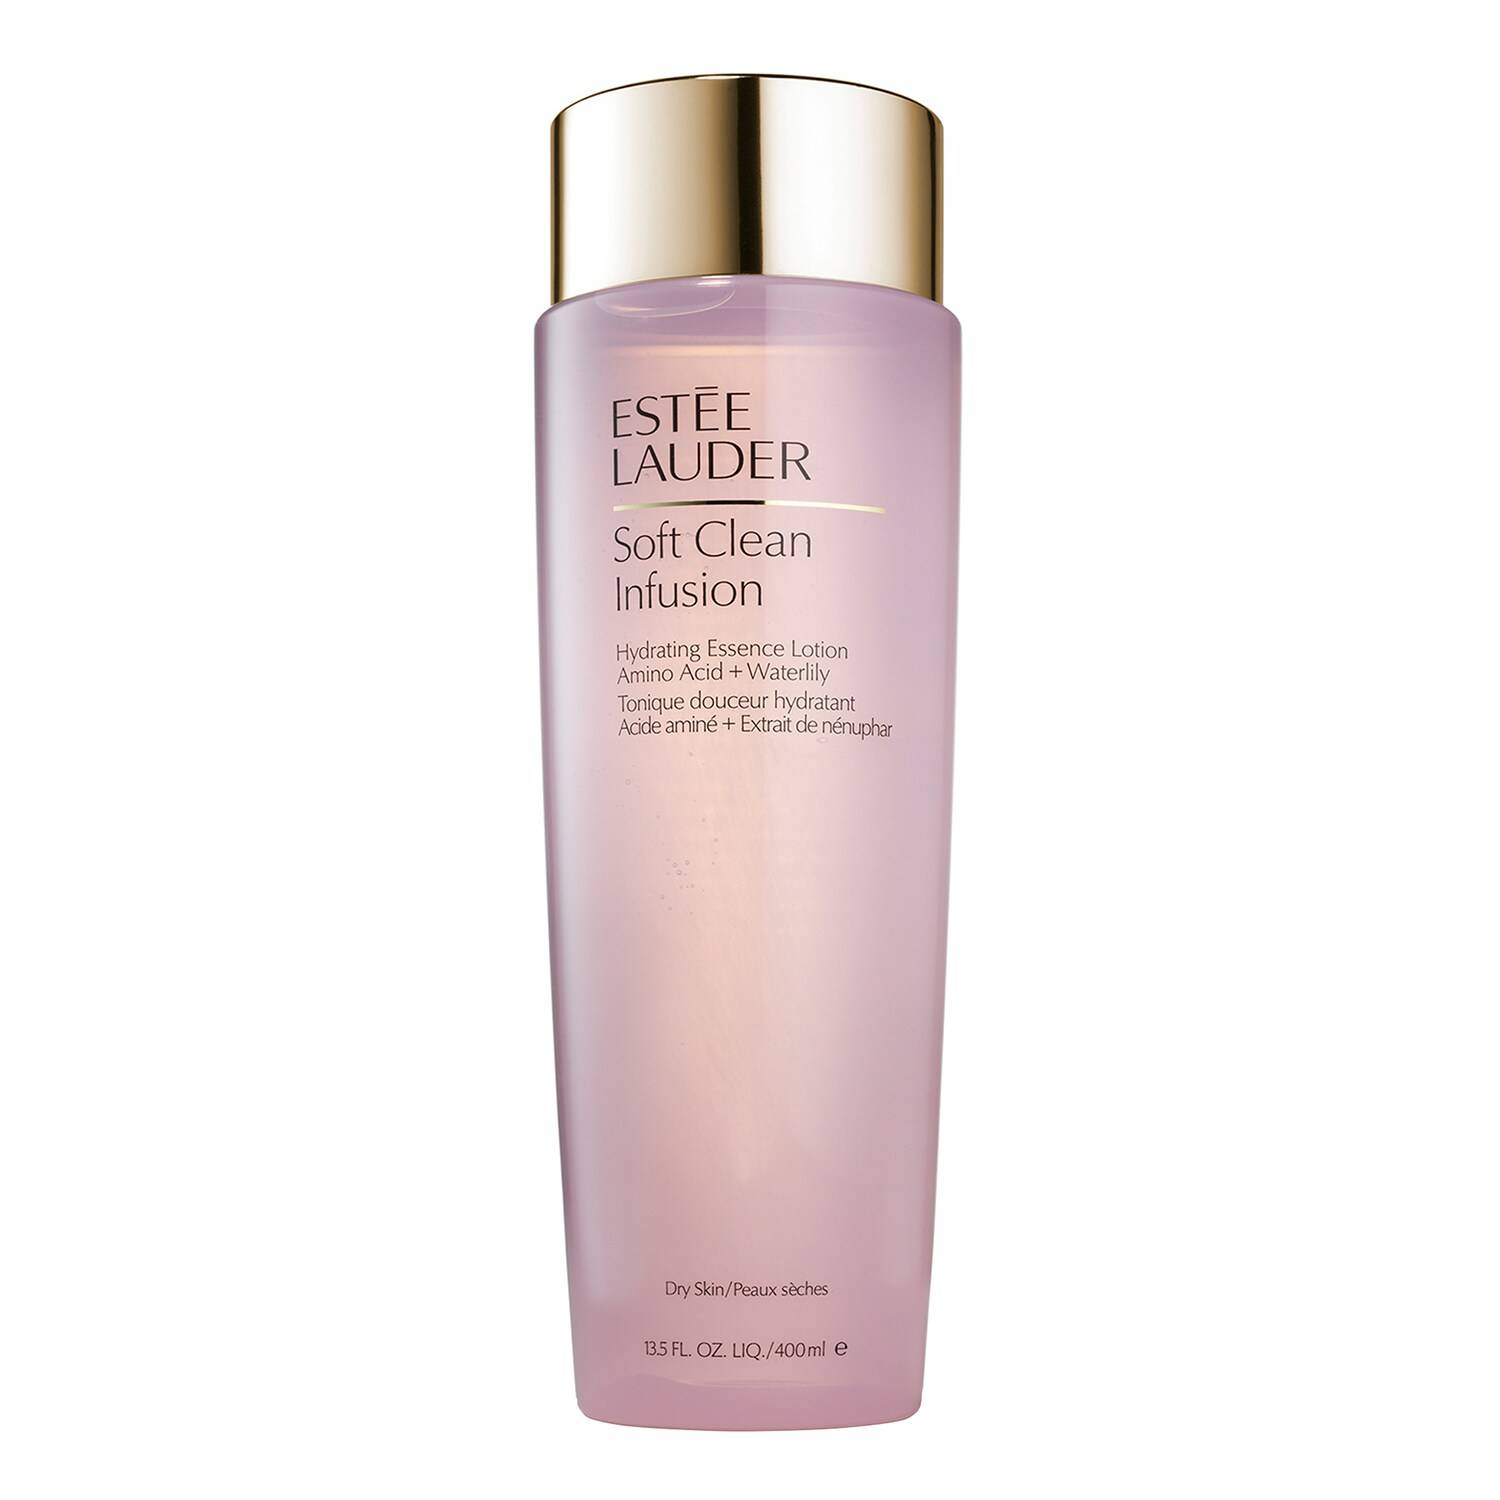 Estee Lauder Soft Clean Infusion Hydrating Essence Lotion 400Ml